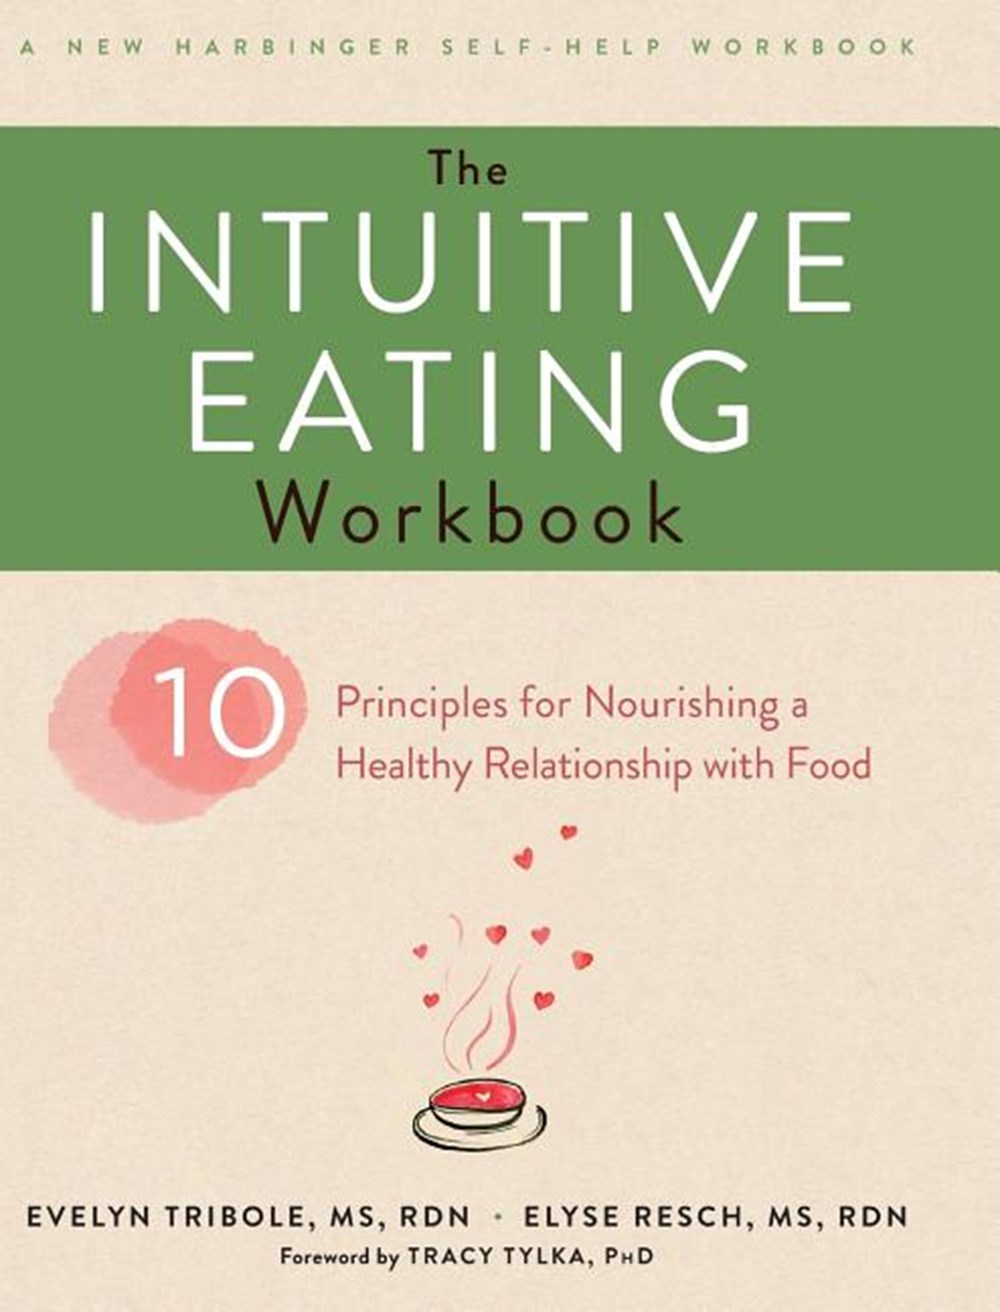 Intuitive Eating Workbook: Ten Principles for Nourishing a Healthy Relationship with Food (A New Har